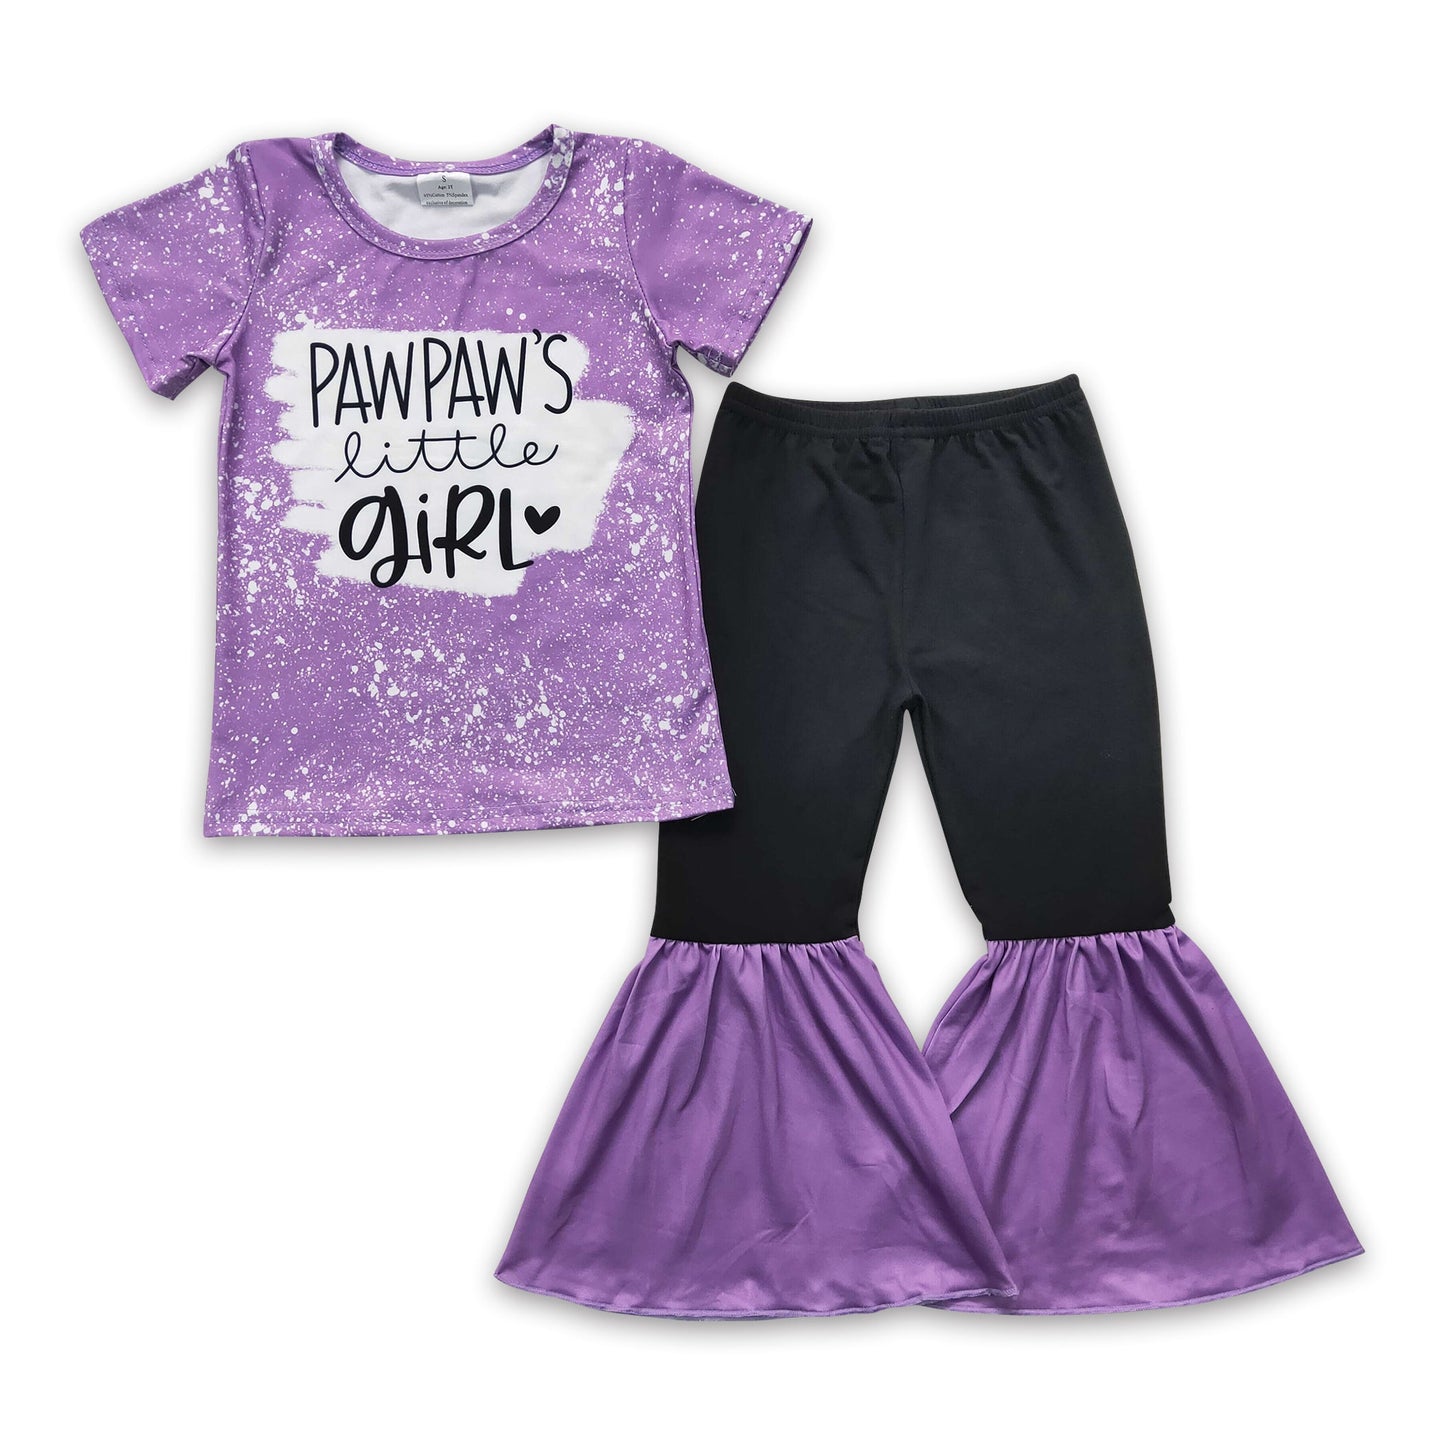 PAWPAW'S little girl purple bell bottom pants baby girls outfits